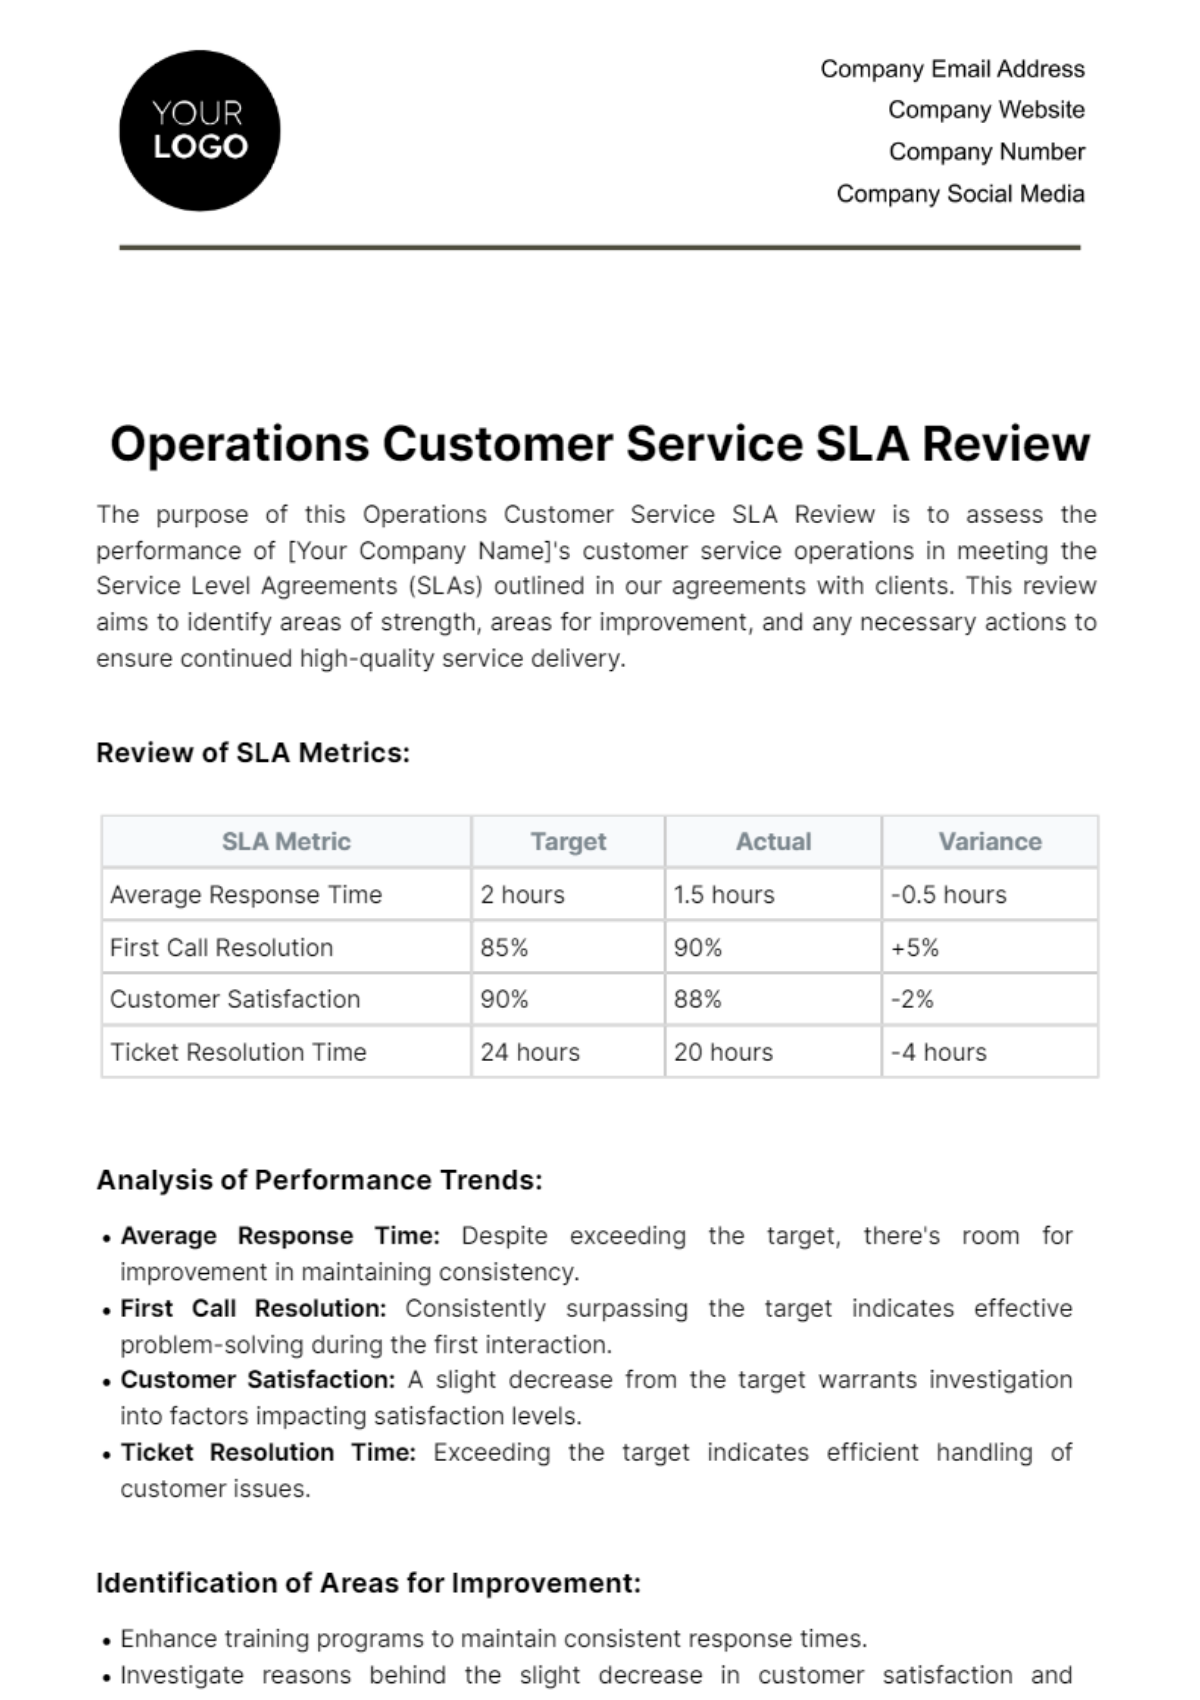 Operations Customer Service SLA Review Template